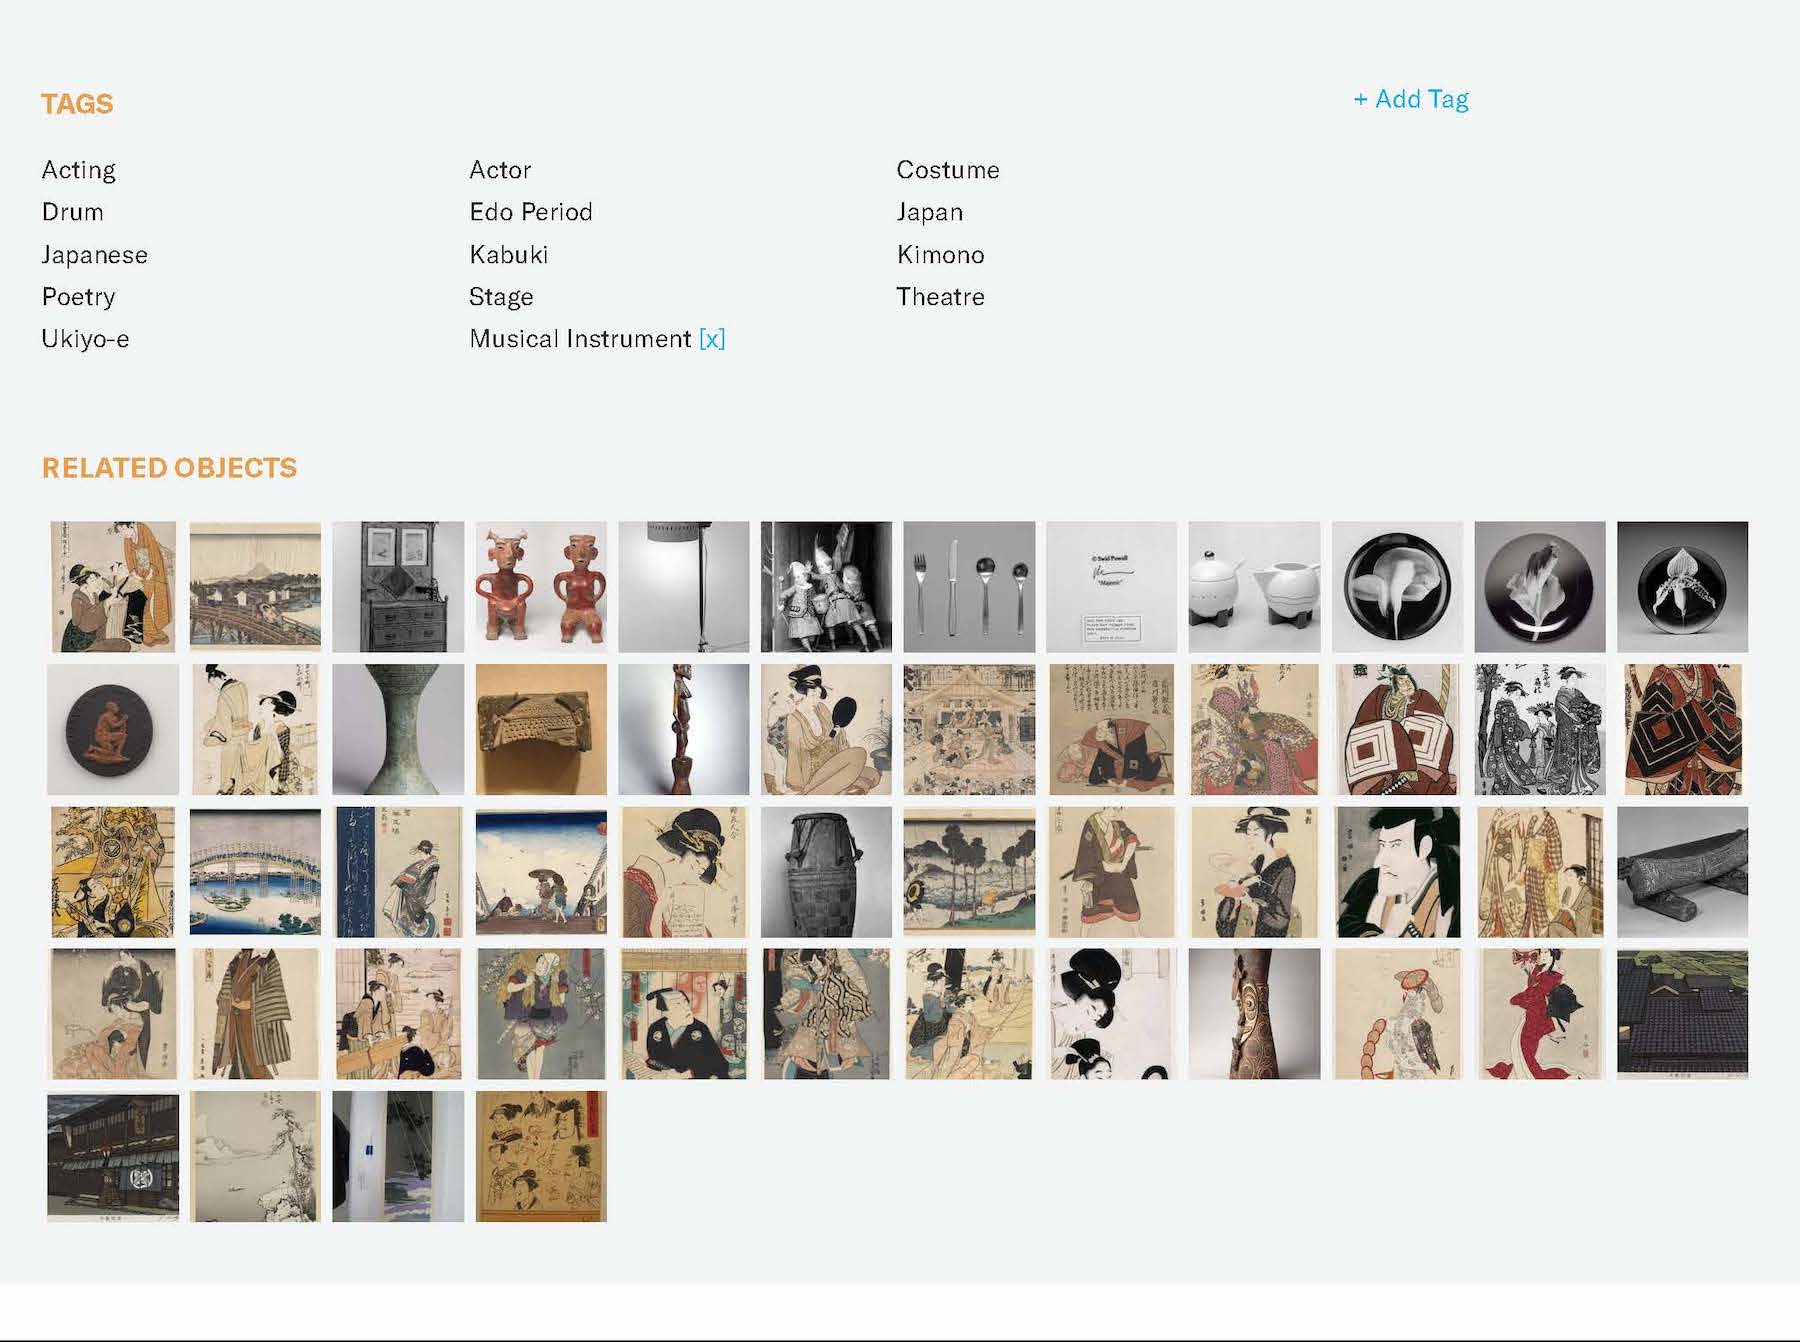 Screenshot of a portion of an object page on the Brooklyn Museum website. Under the title Tags the words Acting, Drum, Japanese, Poetry, Ukiyo-e, Actor, Edo Period, Kabuki, Stage, Musical Instrument, Costume, Japan, Kimono, and Theater are listed in three columns.